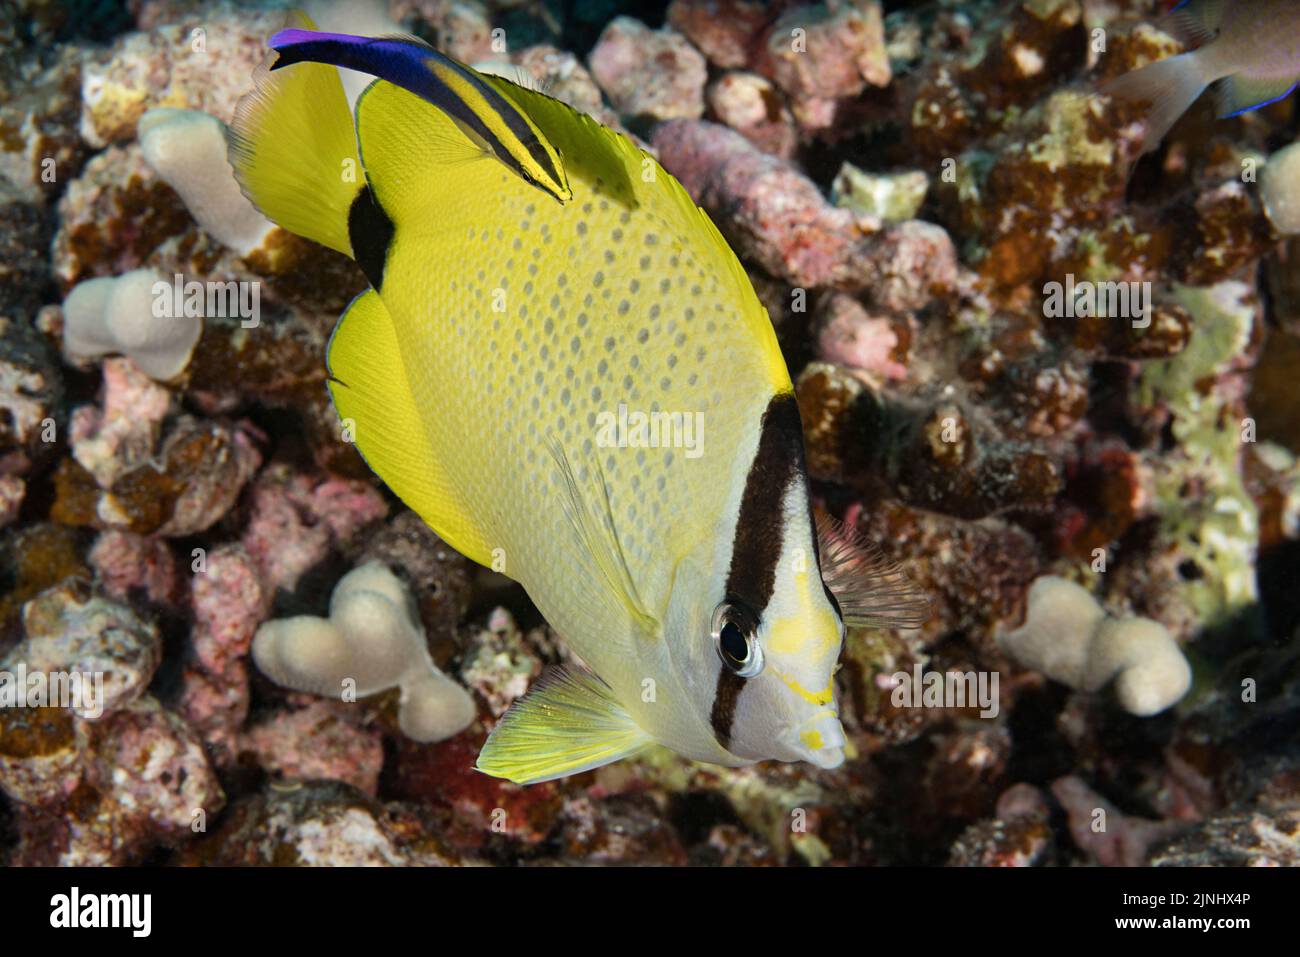 milletseed butterflyfish or lauwiliwili, Chaetodon miliaris, Hawaiian endemic species, has gone pale at a cleaning station, Kona, Hawaii, USA, Pacific Stock Photo